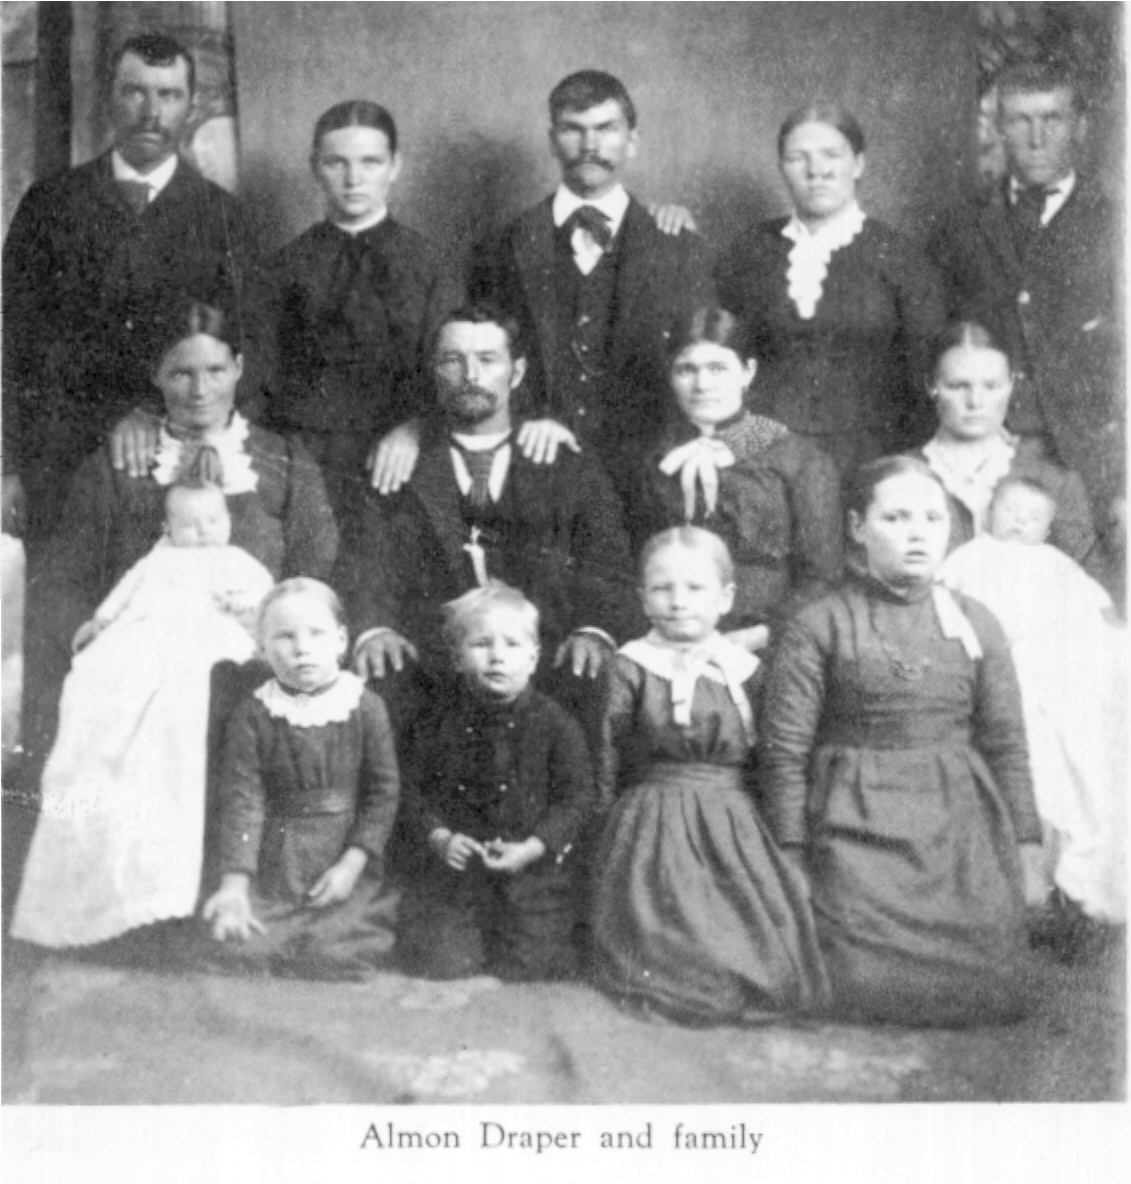 Almon Draper and some members of his family